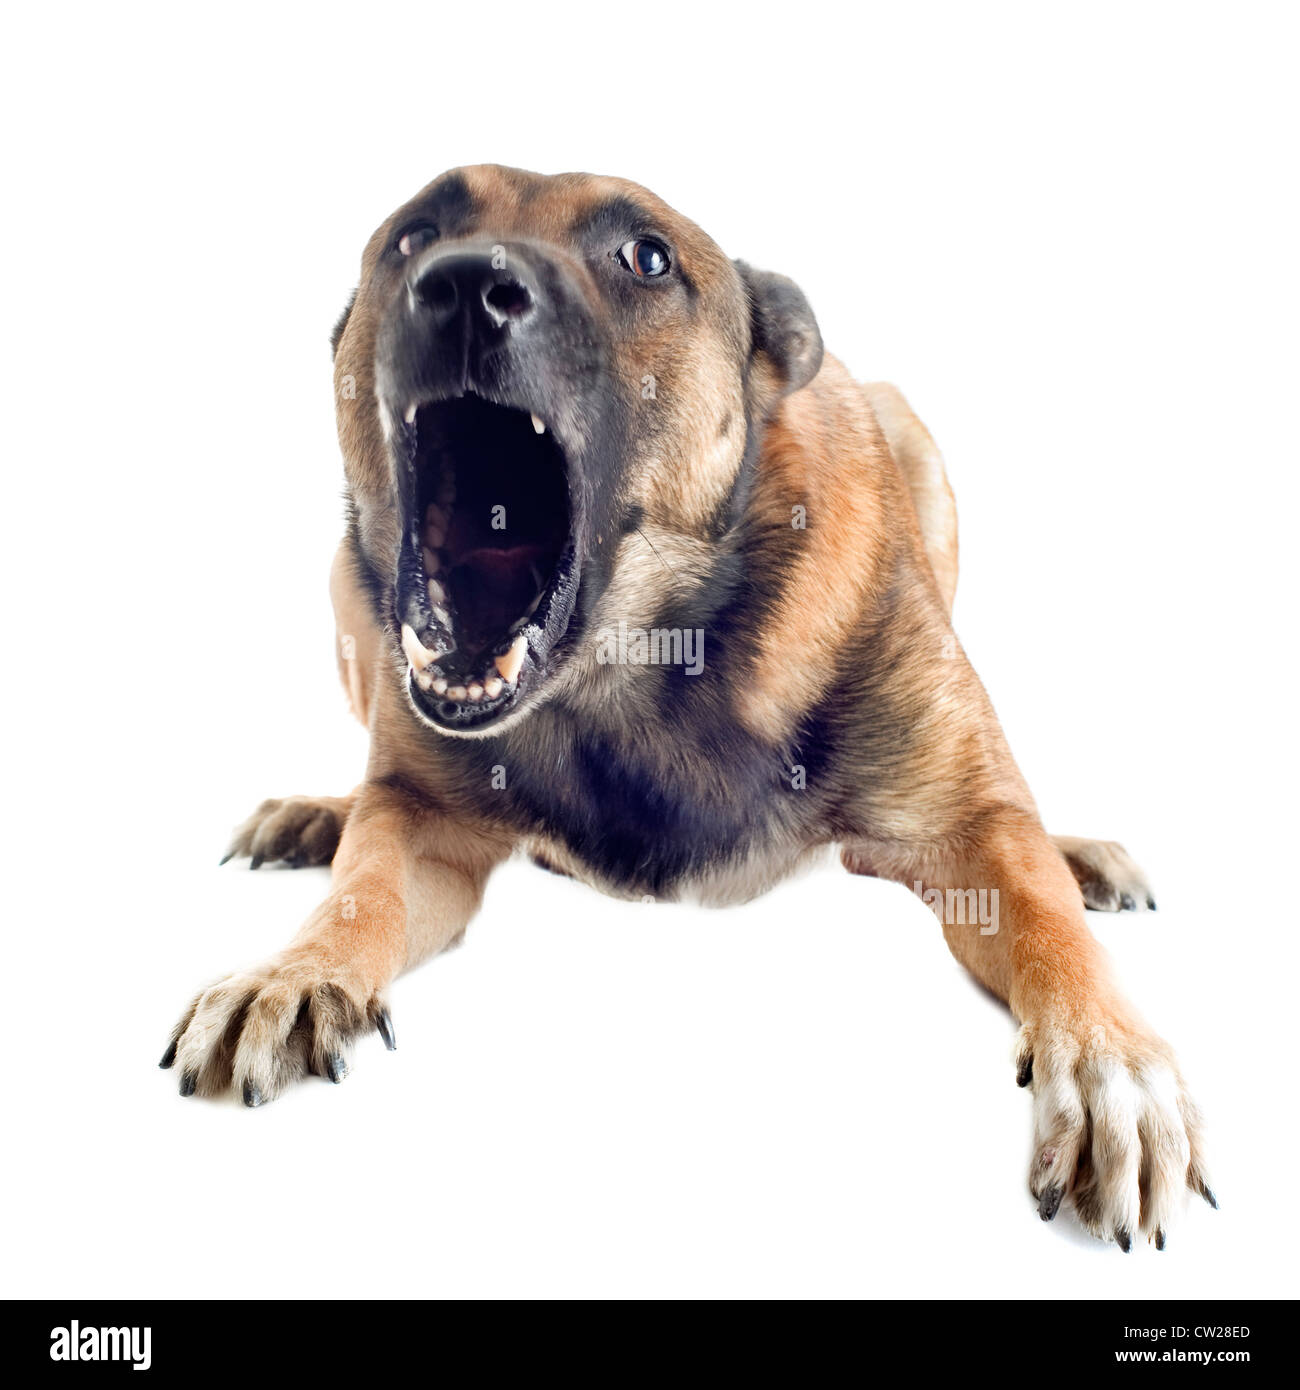 angry purebred belgian sheepdog malinois on a white background, focus on the eye Stock Photo